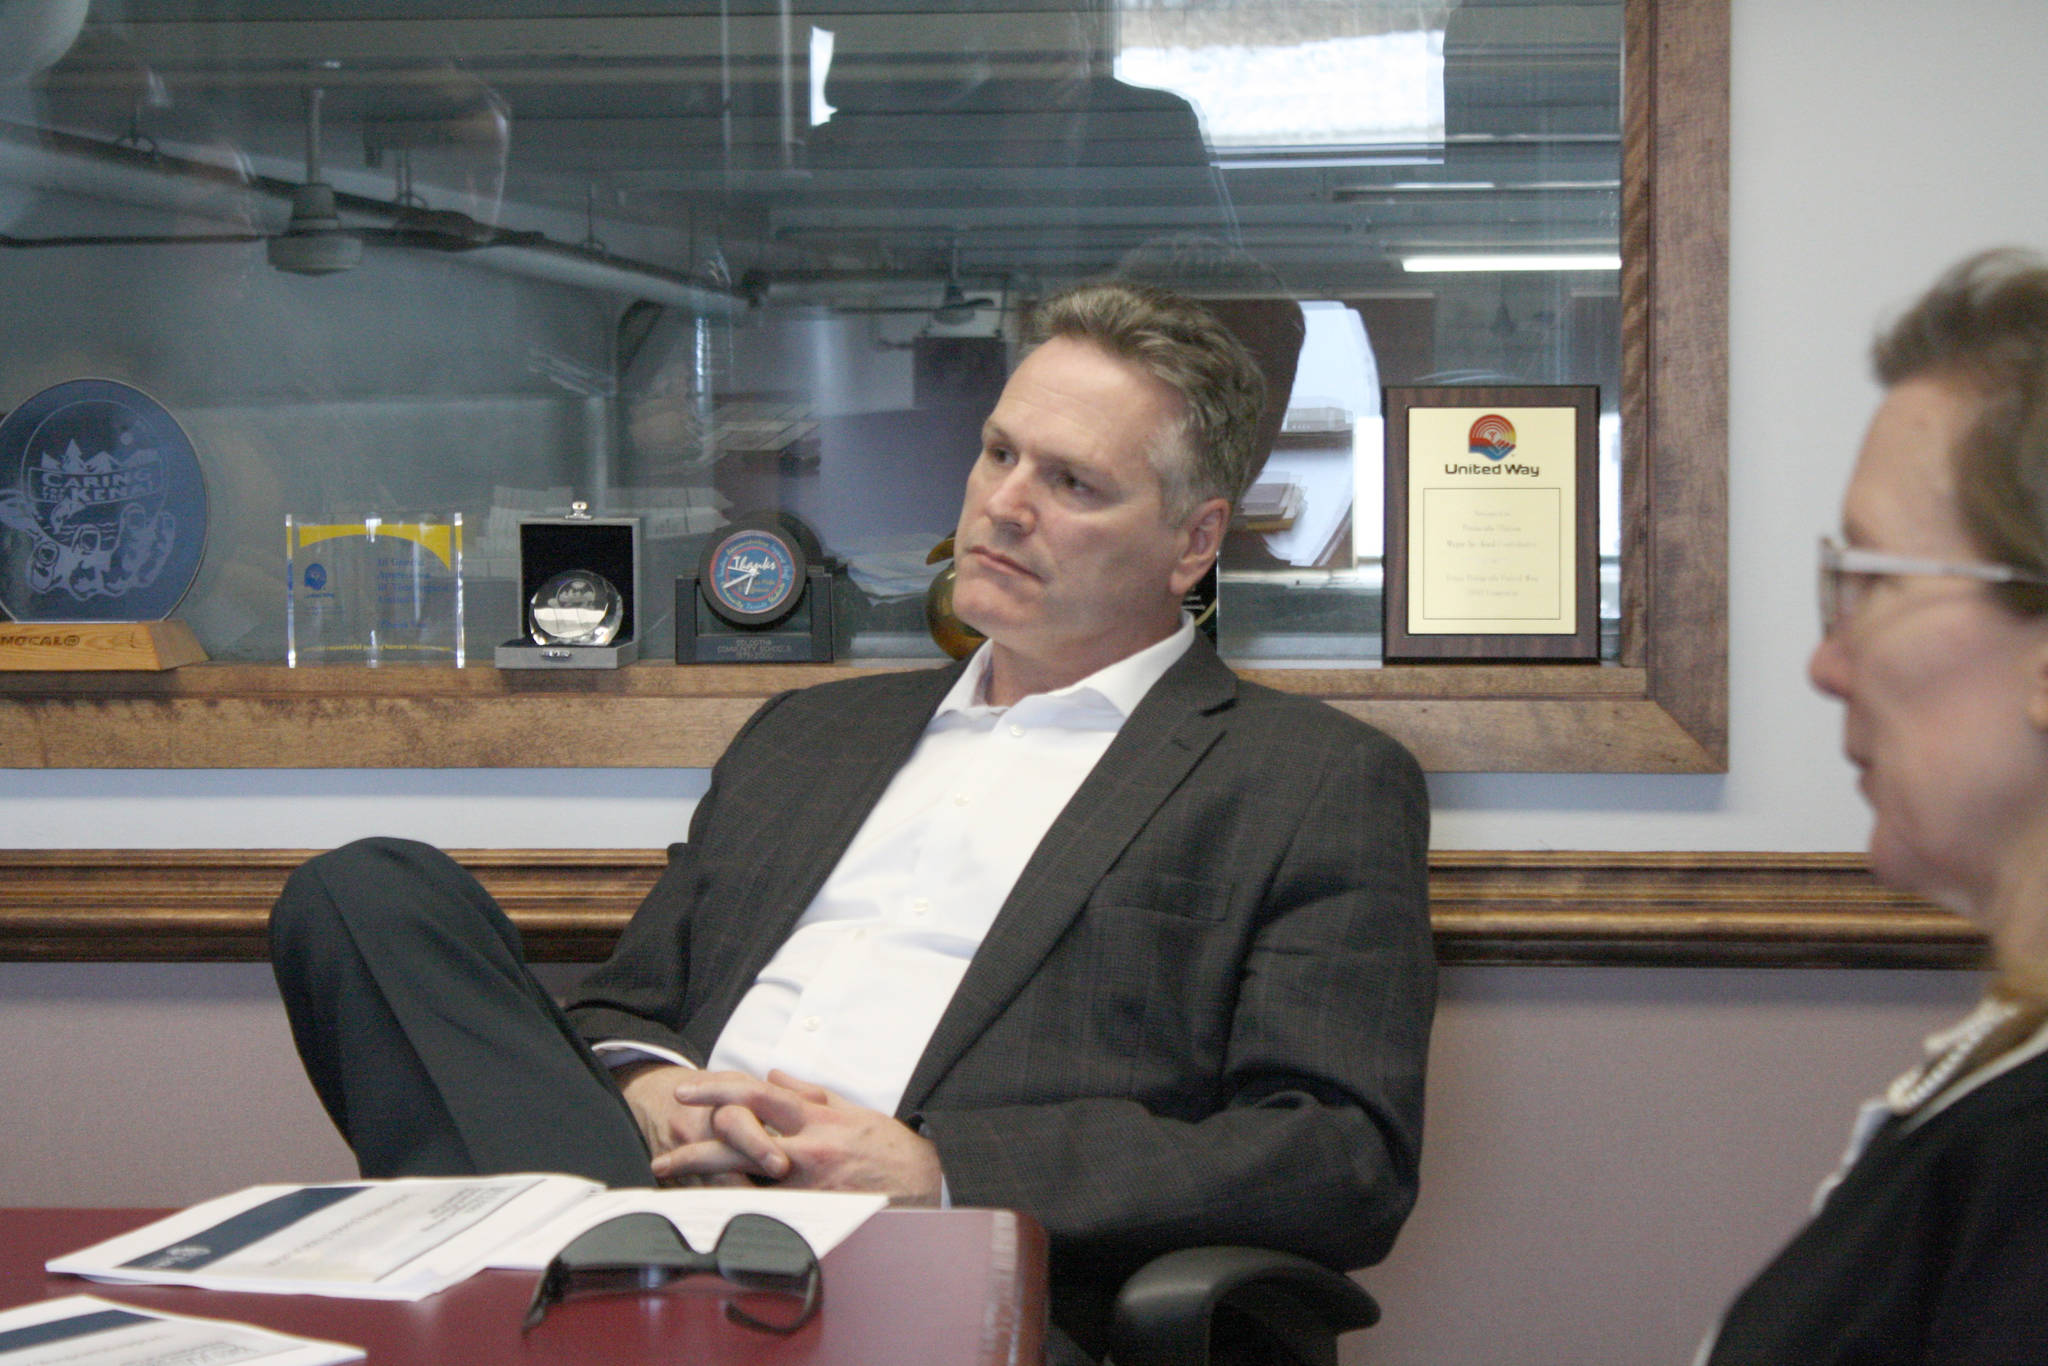 Gov. Mike Dunleavy, center, speaks about education with Clarion reporters Brian Mazurek and Victoria Petersen (not pictured) on Monday, March 25, 2019, in Kenai, Alaska. The governor answered questions on a wide range of topics, including public safety, education, industry and his proposed budget. (Photo by Erin Thompson/Peninsula Clarion)